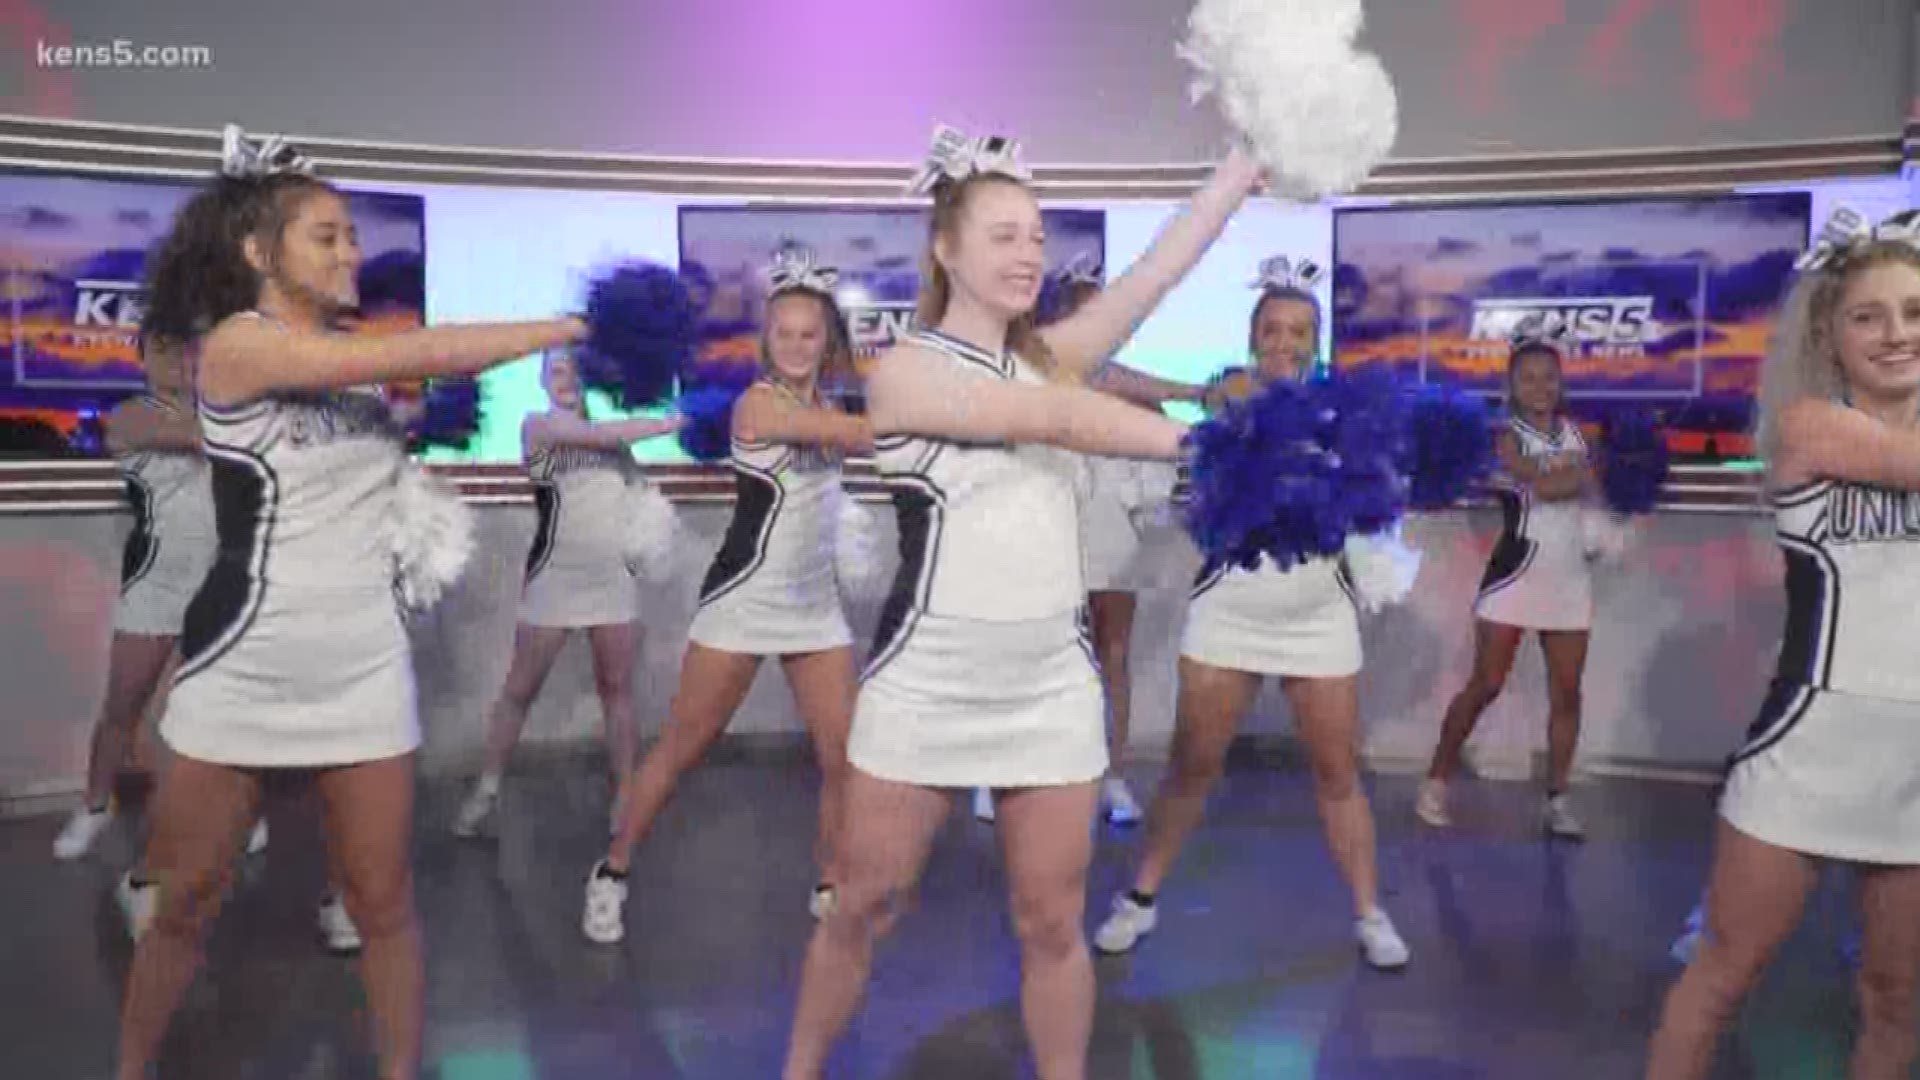 The New Braunfels High Schol cheerleaders stopped by the KENS 5 studio for Eyewitness News Saturday Morning: Back-to-School edition.